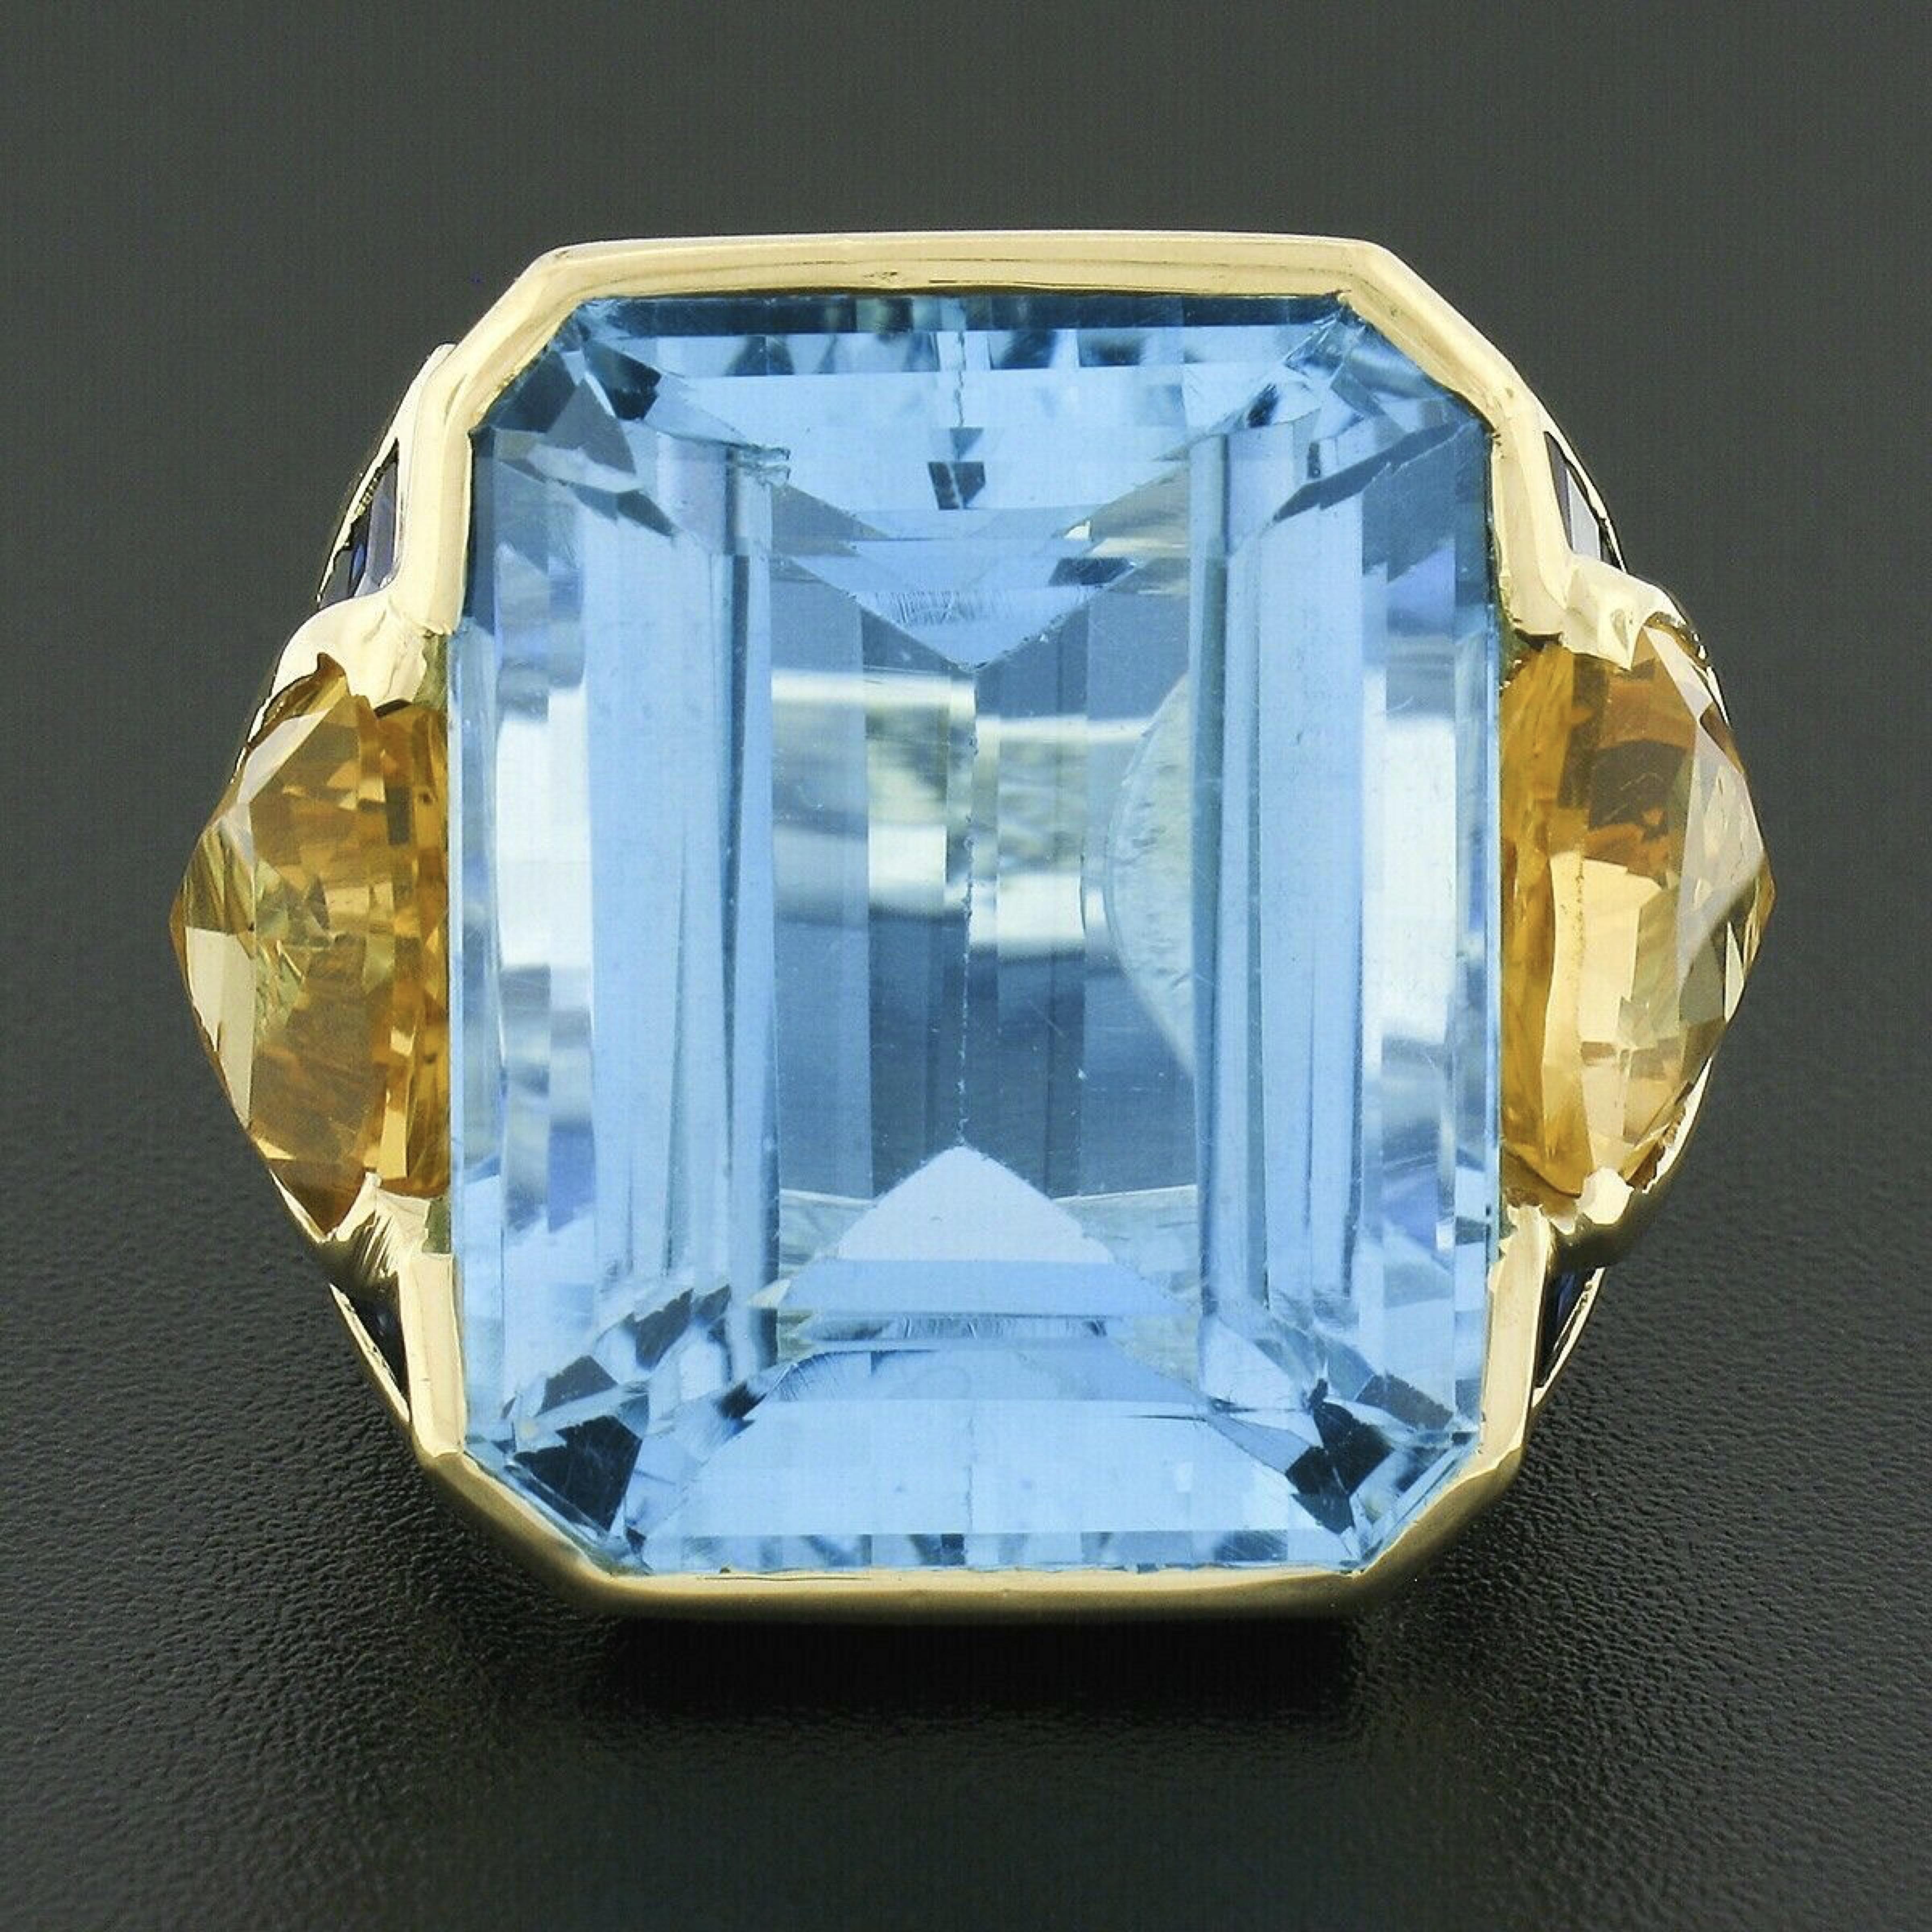 This absolutely breathtaking vintage statement ring was crafted in solid 18k yellow gold and features a HUGE natural genuine blue topaz solitaire neatly channel set at its center. This very fine stone has an emerald cut and displays the most